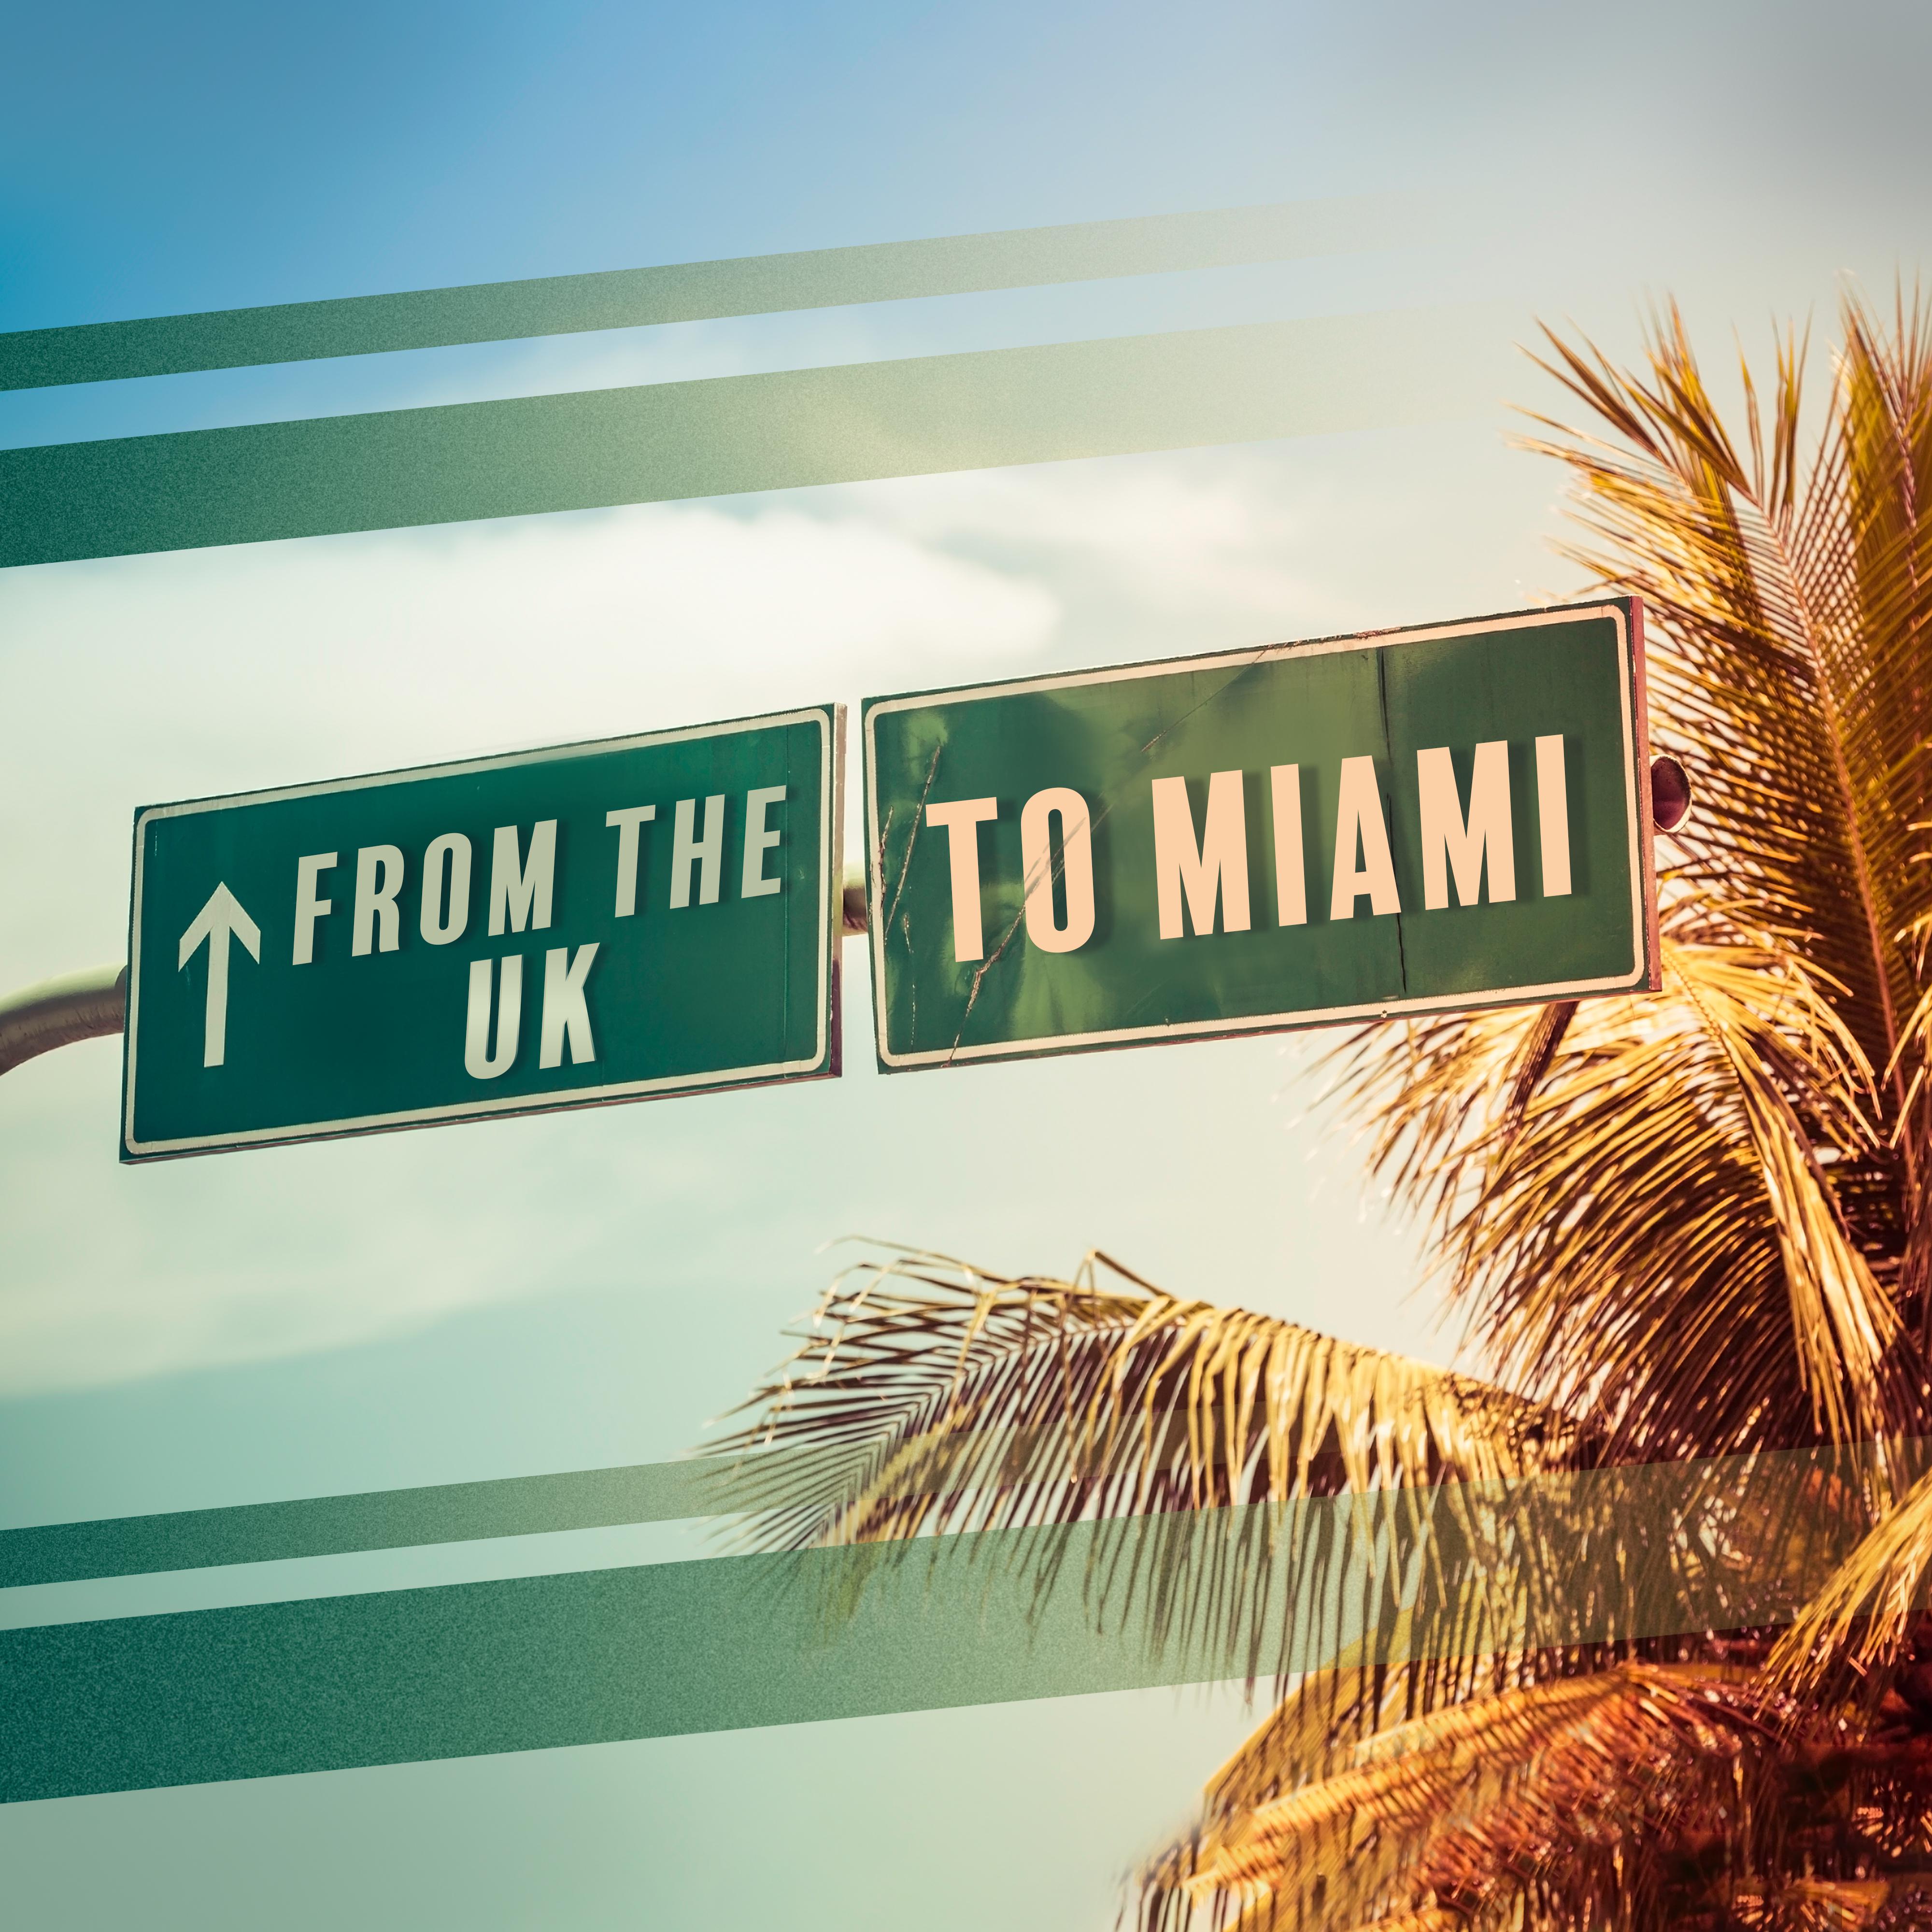 From the UK to Miami - **** Chillout Music from the Hottest Beaches of Miami for Chilling Out and Resting